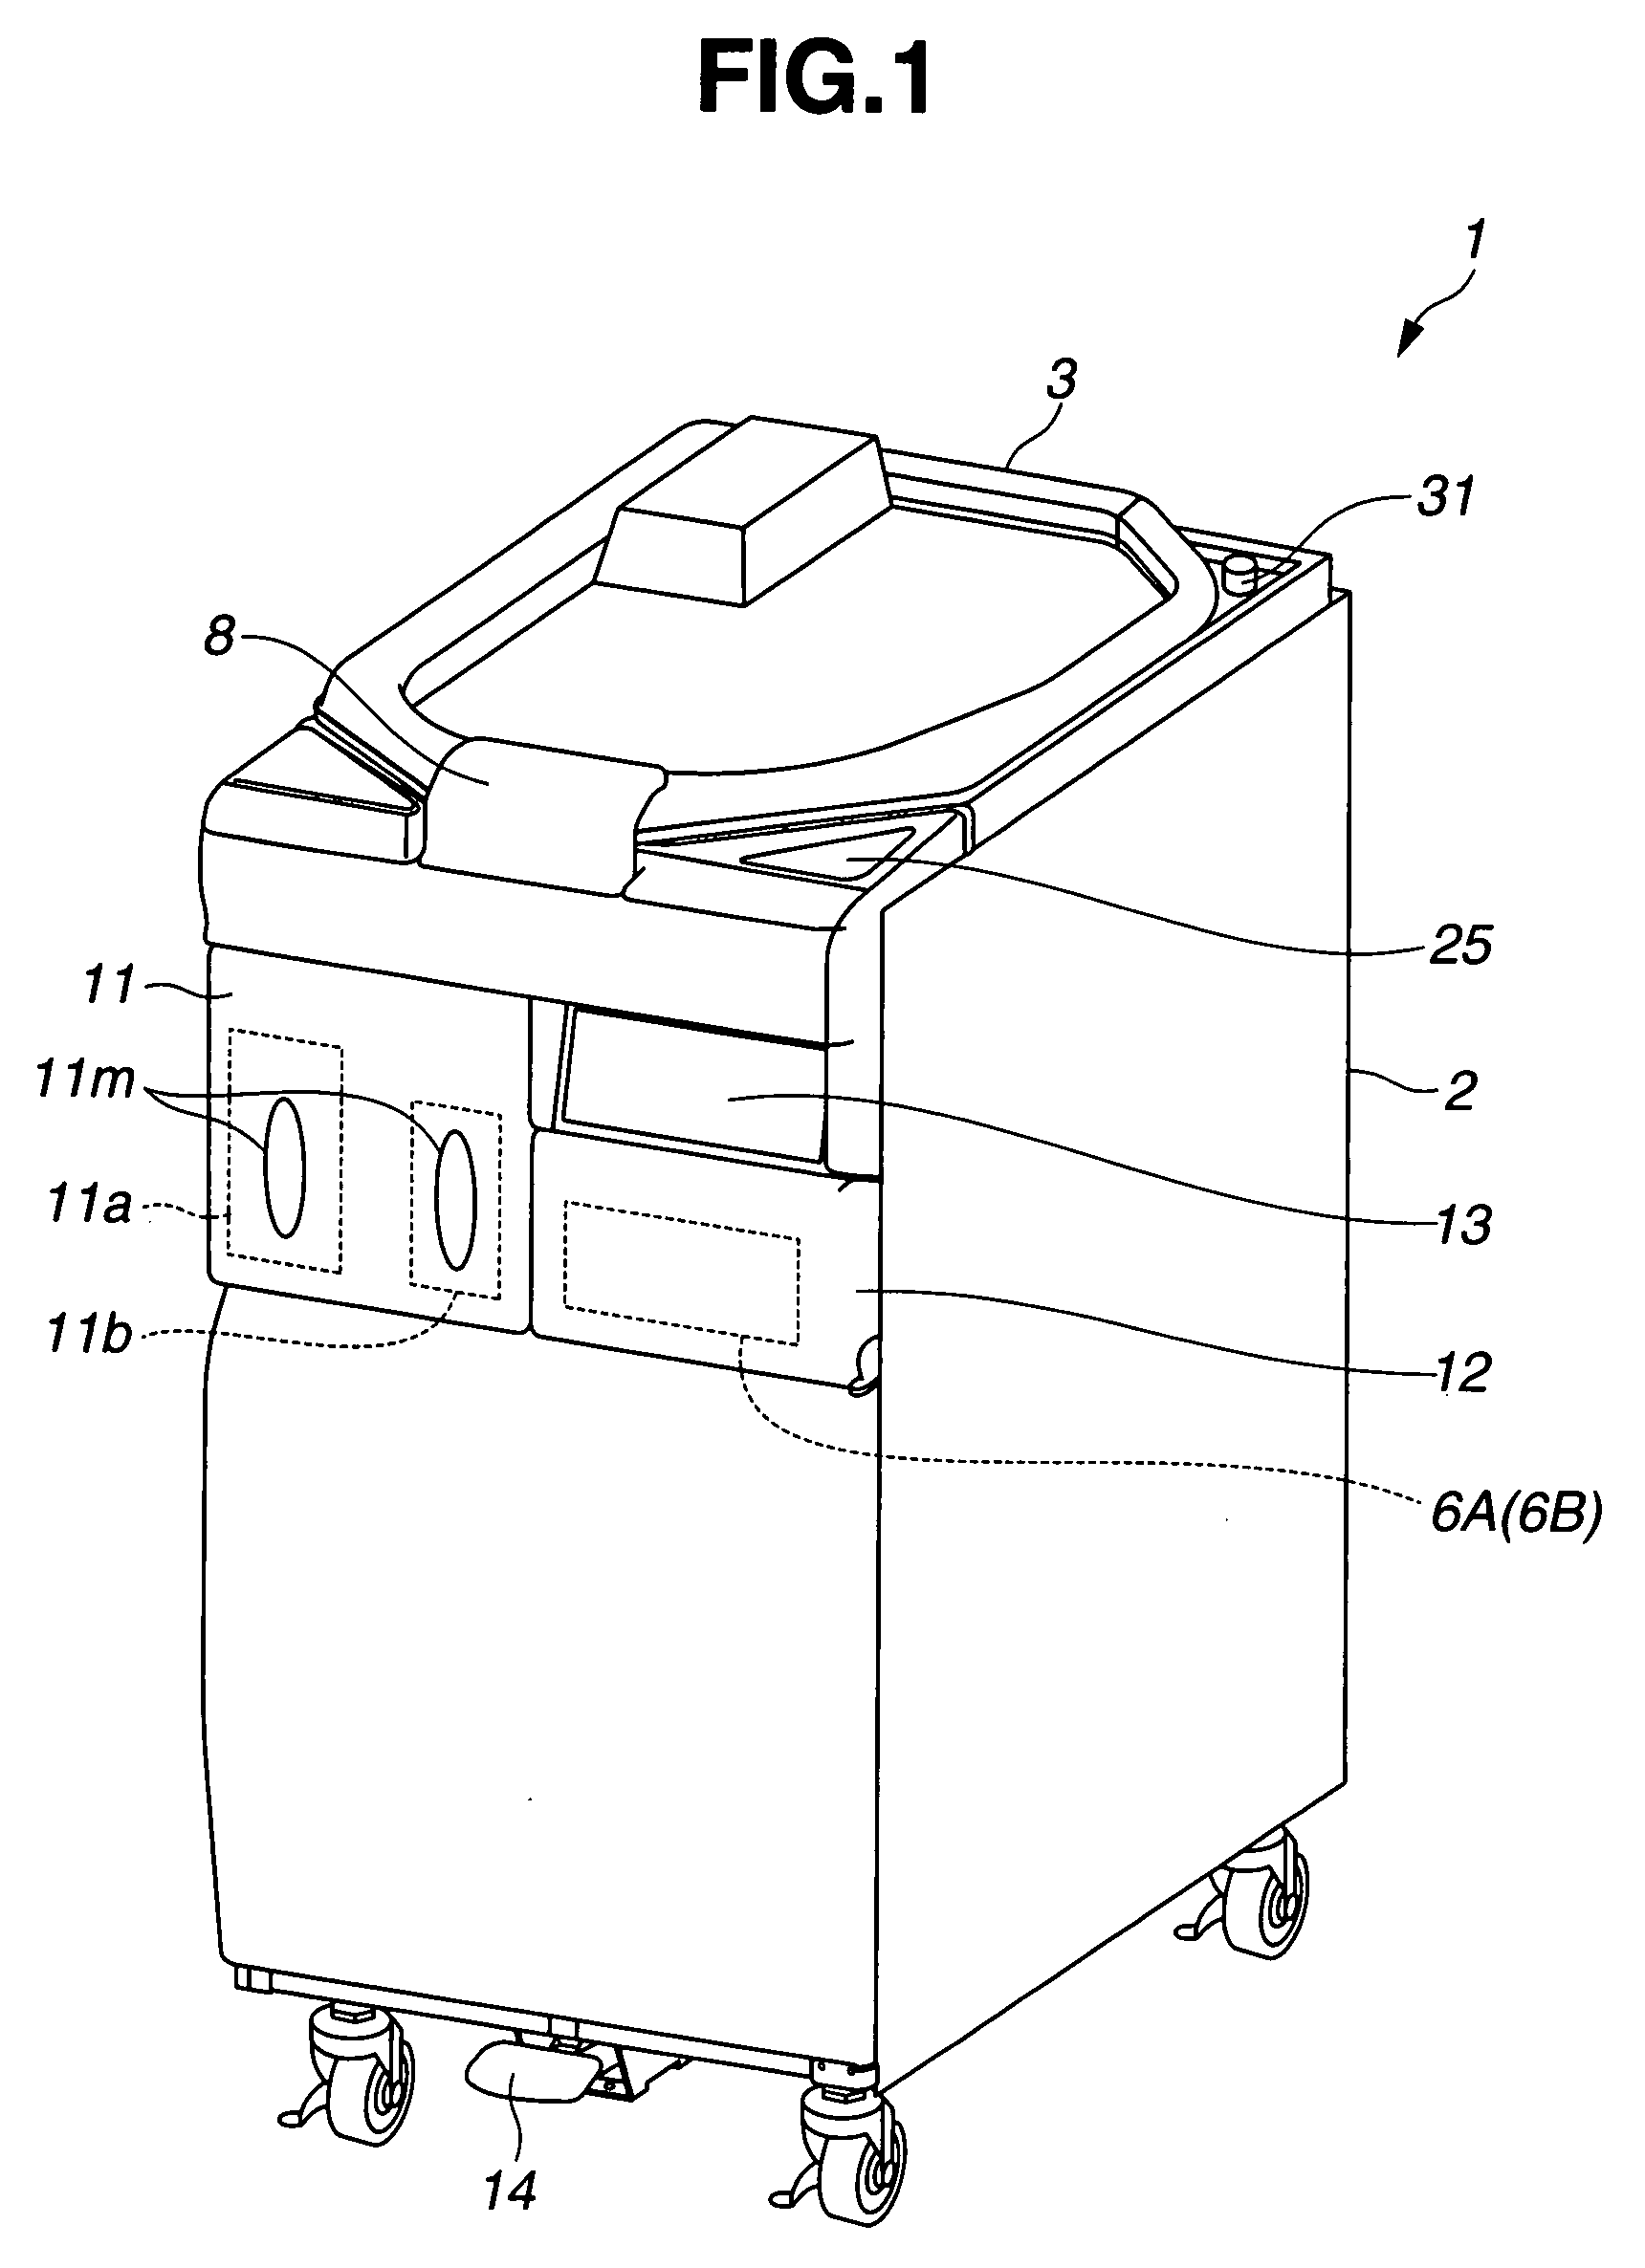 Endoscope cleaning/disinfecting apparatus